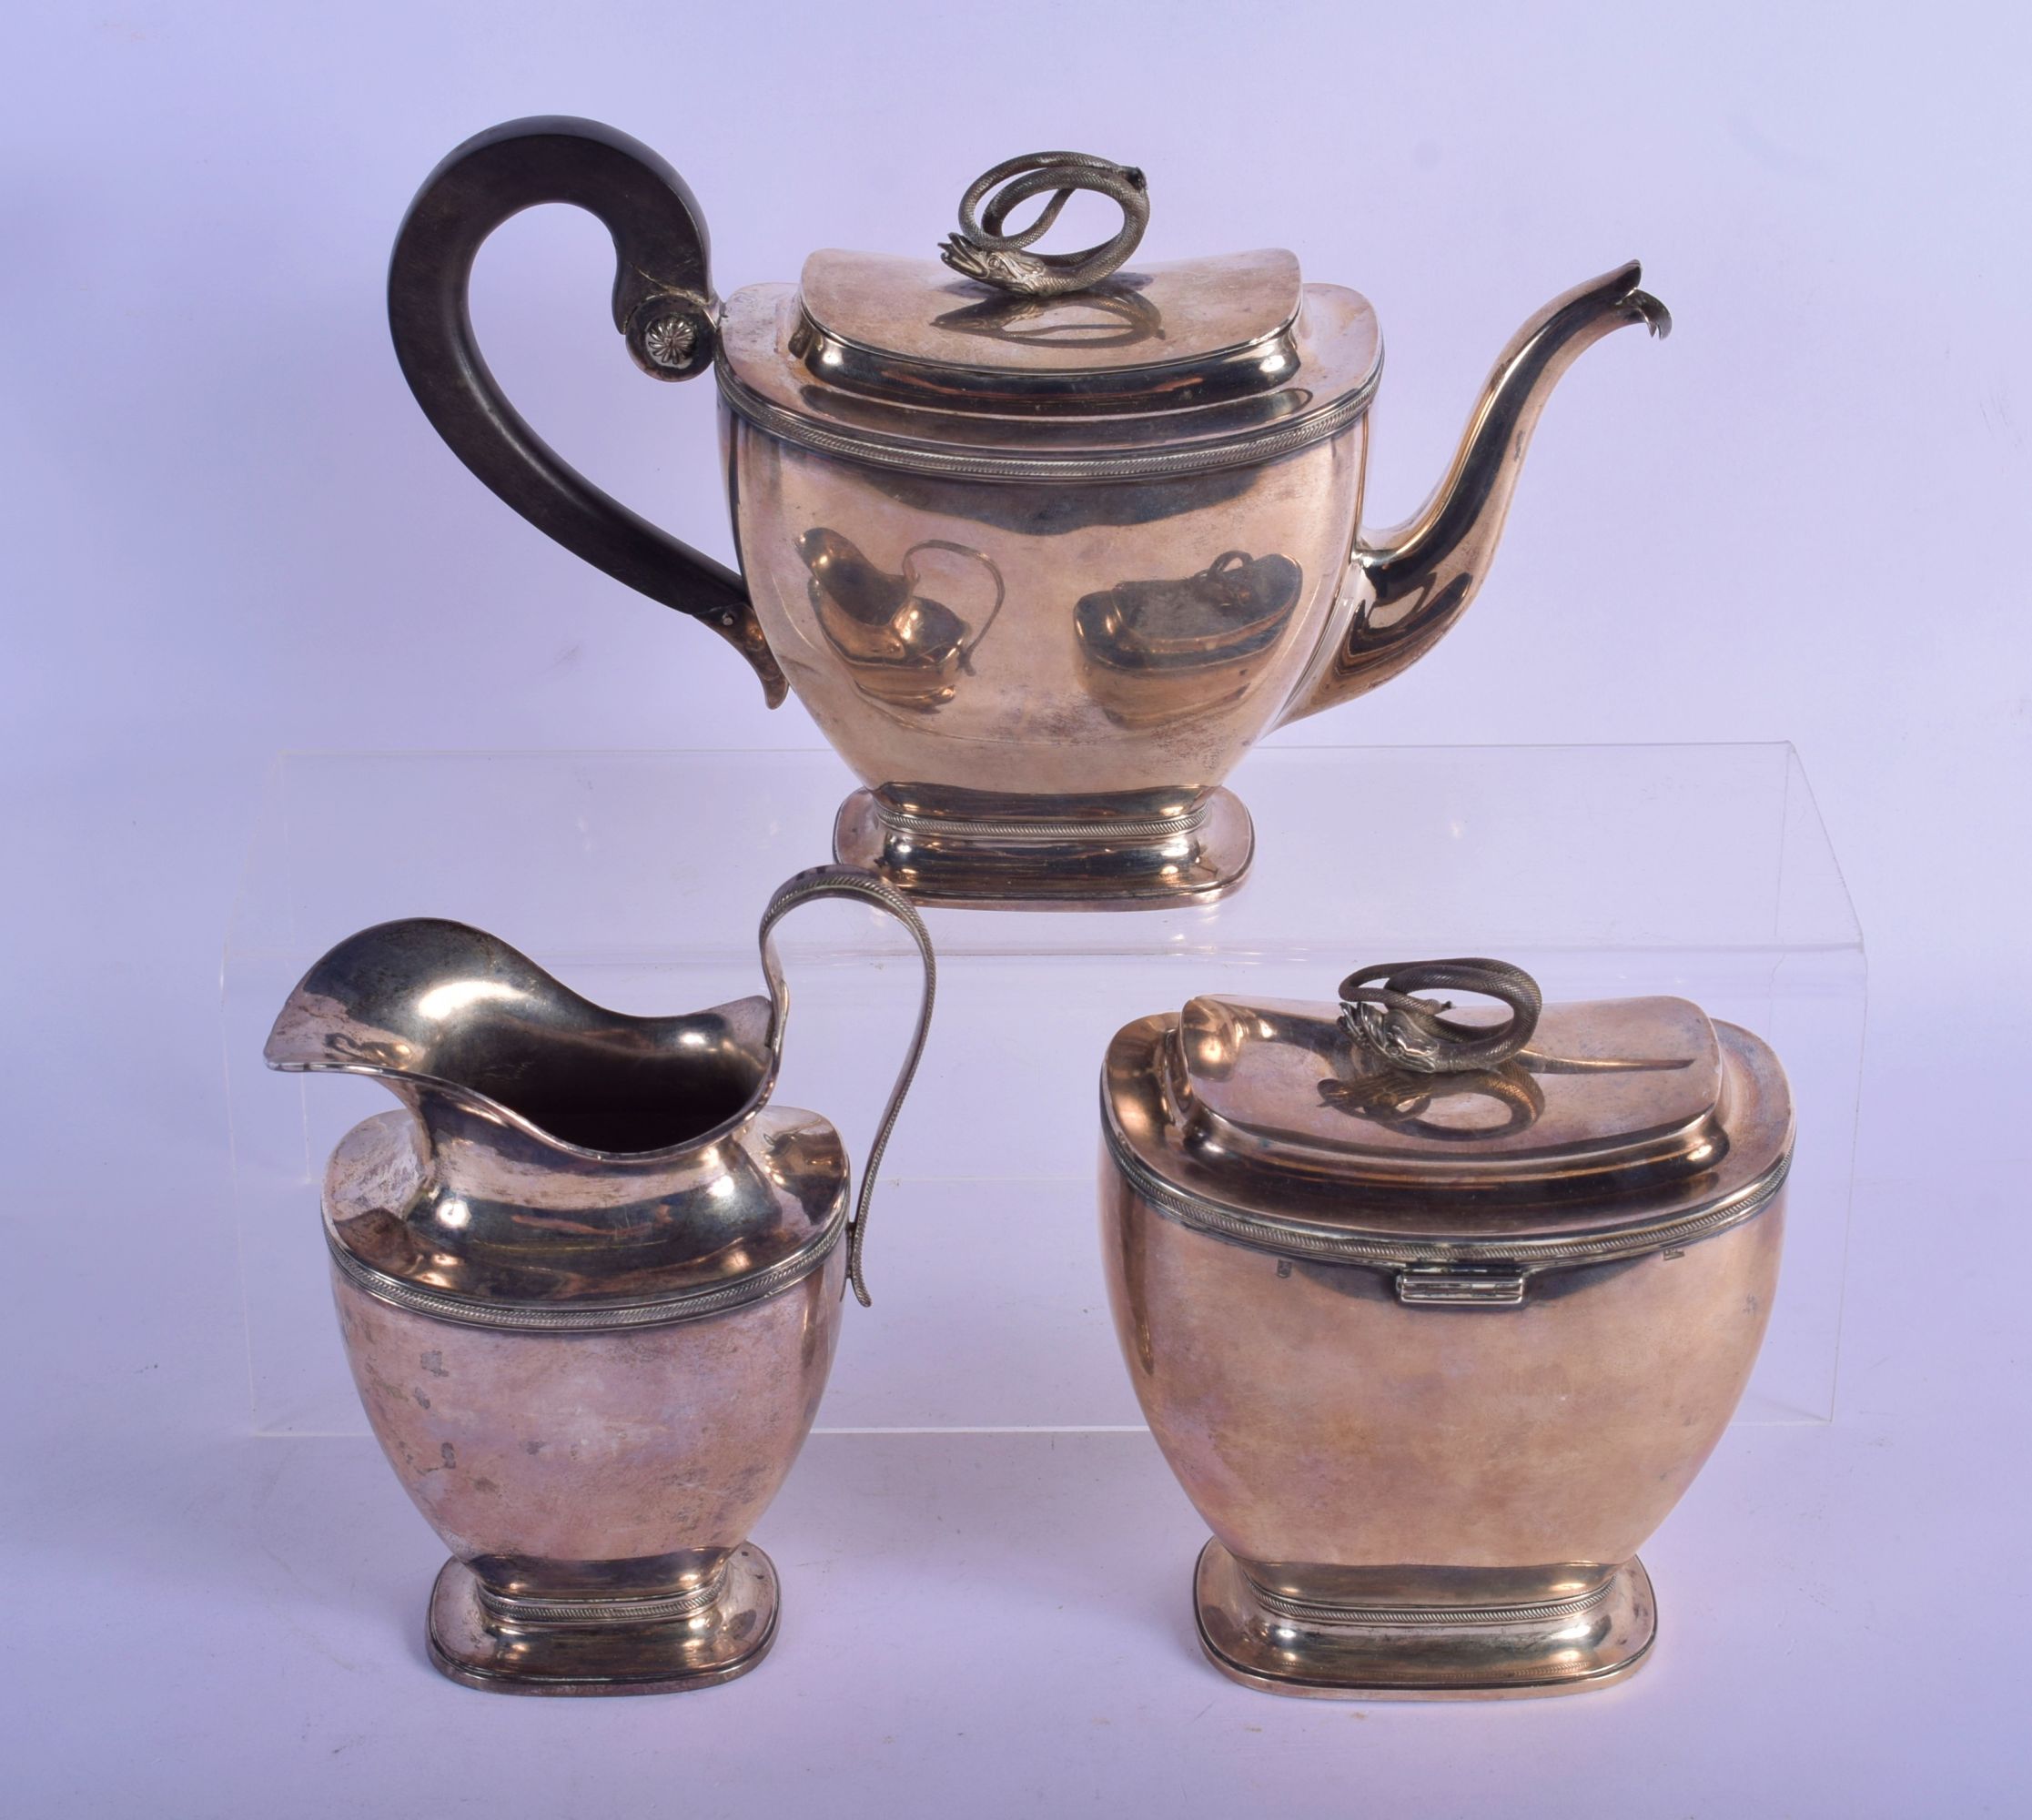 A 19TH CENTURY EUROPEAN SILVER SERPENT TEAPOT together with a similar tea caddy and cream jug. 1001 - Image 2 of 9